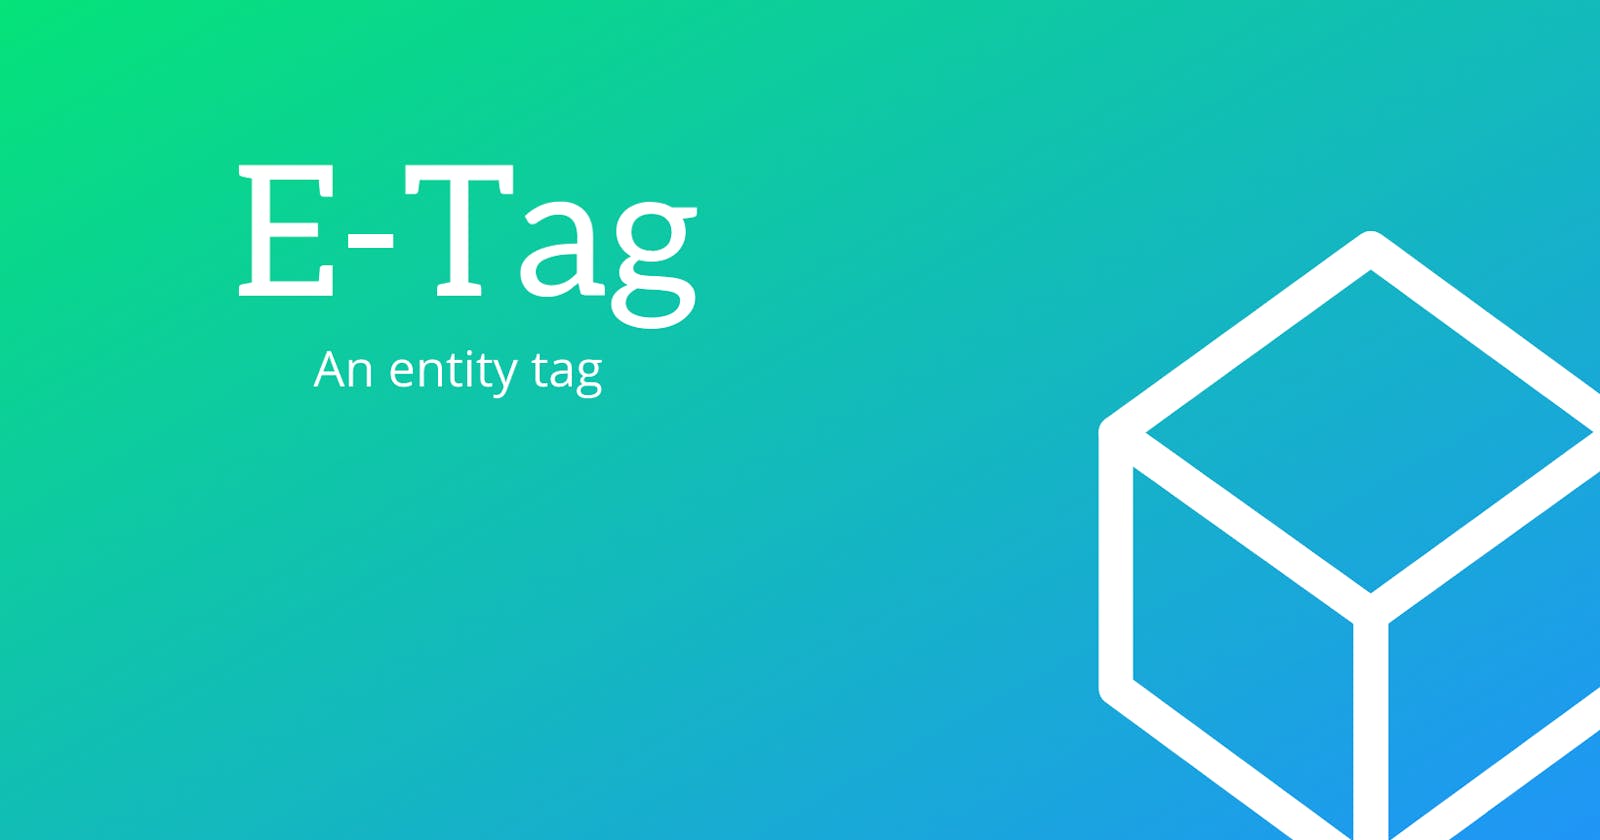 What is ETag and why we use it